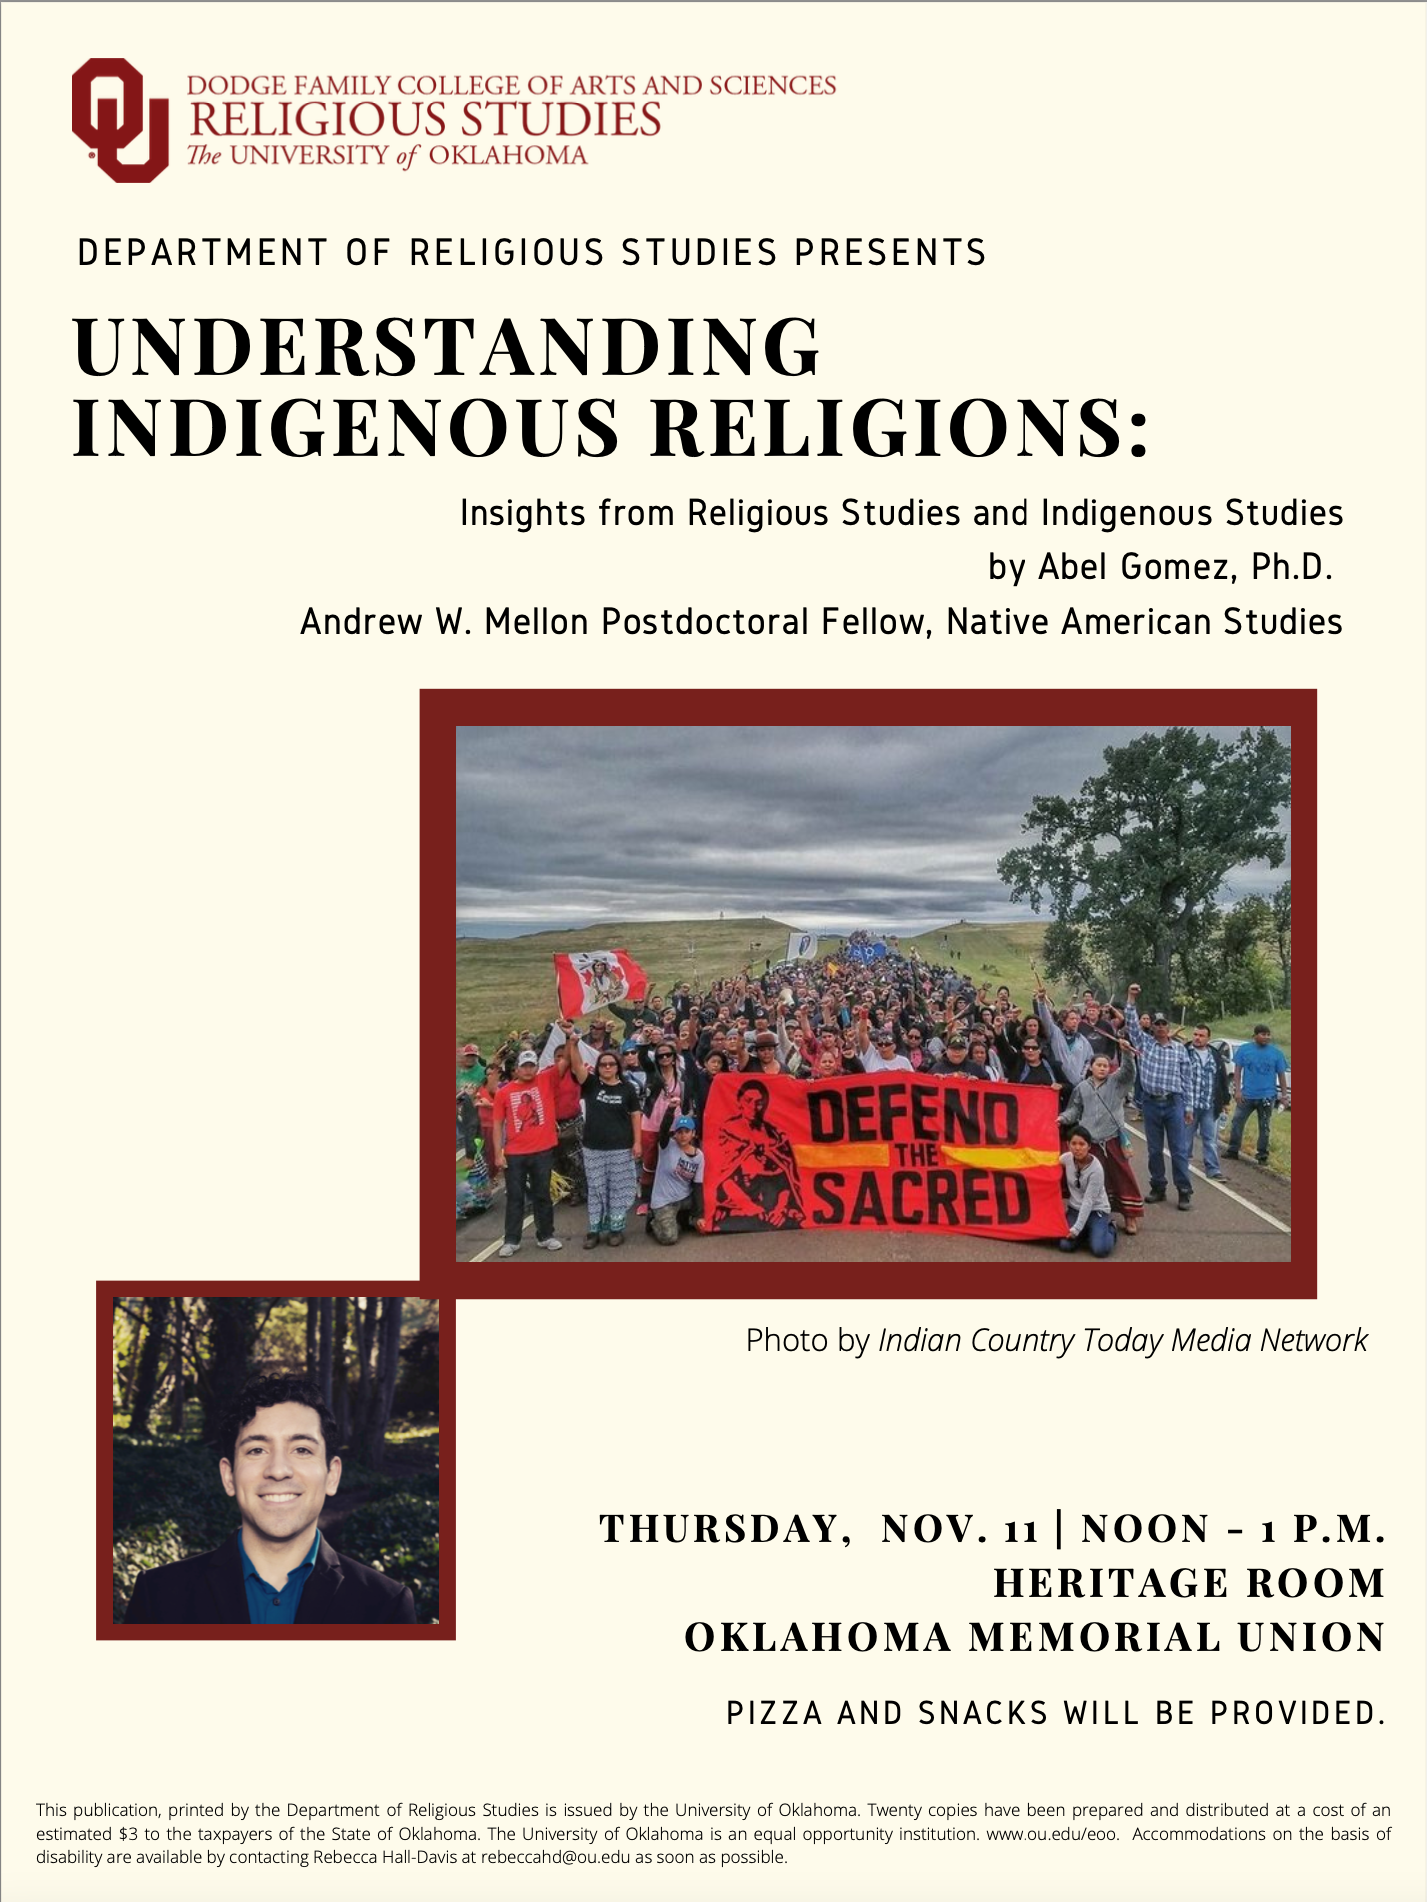 The Department of Religious Studies presents: Understanding Indigenous Religions: Insights from Religious Studies and Indigenous Studies by Abel Gomez, Ph.D., Andrew W. Mellon Postdoctoral Fellow, Native American Studies    Thursday, November 11; noon to 1 p.m.  Heritage Room, Oklahoma Memorial Union  Pizza and snacks will be provided.    Accommodations on the basis of disability are available by contacting Rebecca Hall-Davis at rebeccahd@ou.edu as soon as possible.  Abel Gomez, Ph.D.; Understanding Indigenous Religions: Insights from Religious Studies and Indigenous Studies - Nov. 11, noon - 1 p.m.